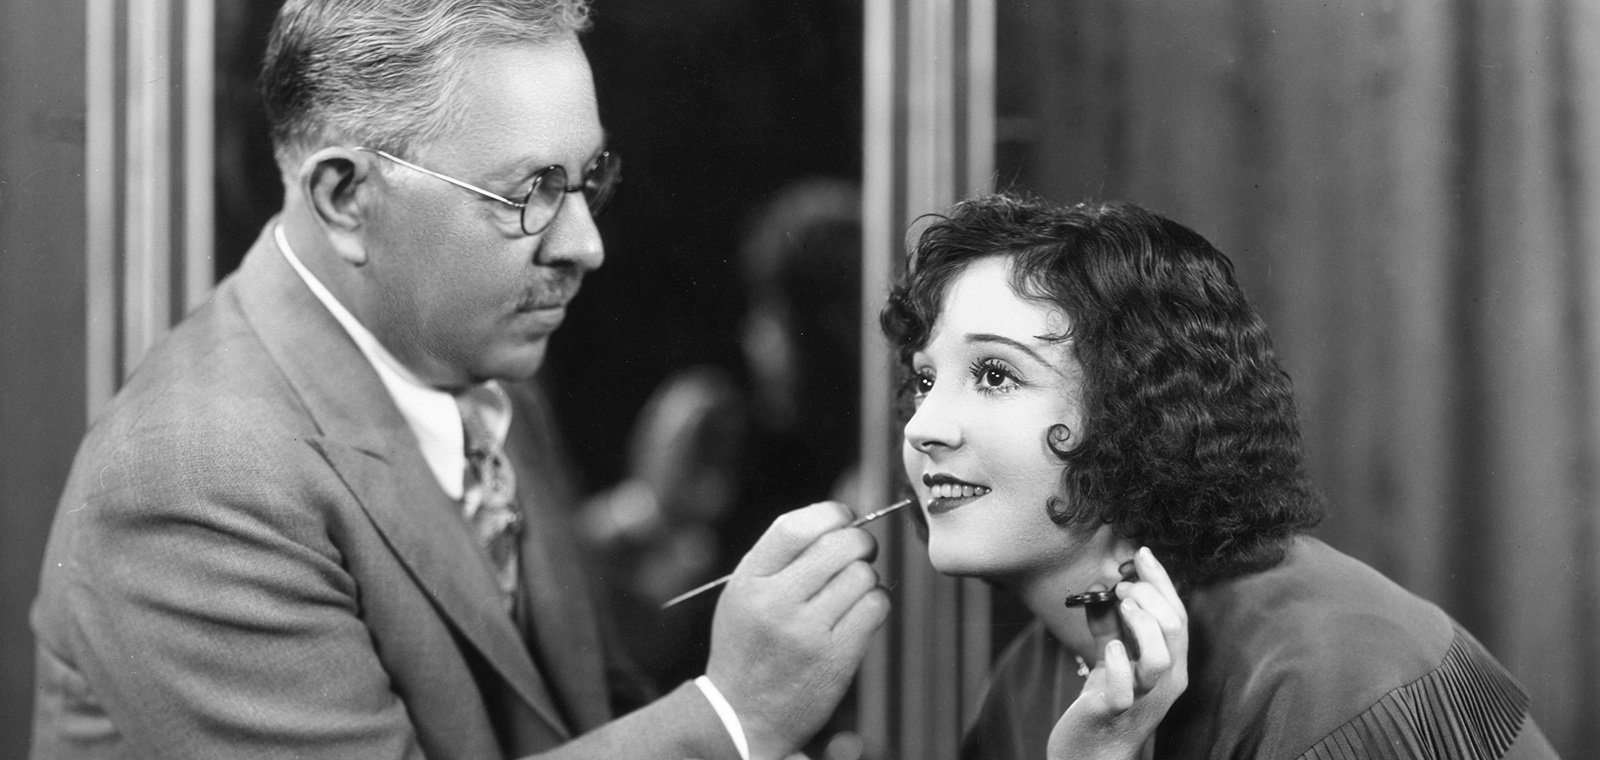 Max Factor working on the make-up of an Hollywood actress. from Max Factor official site www.maxfactor.com